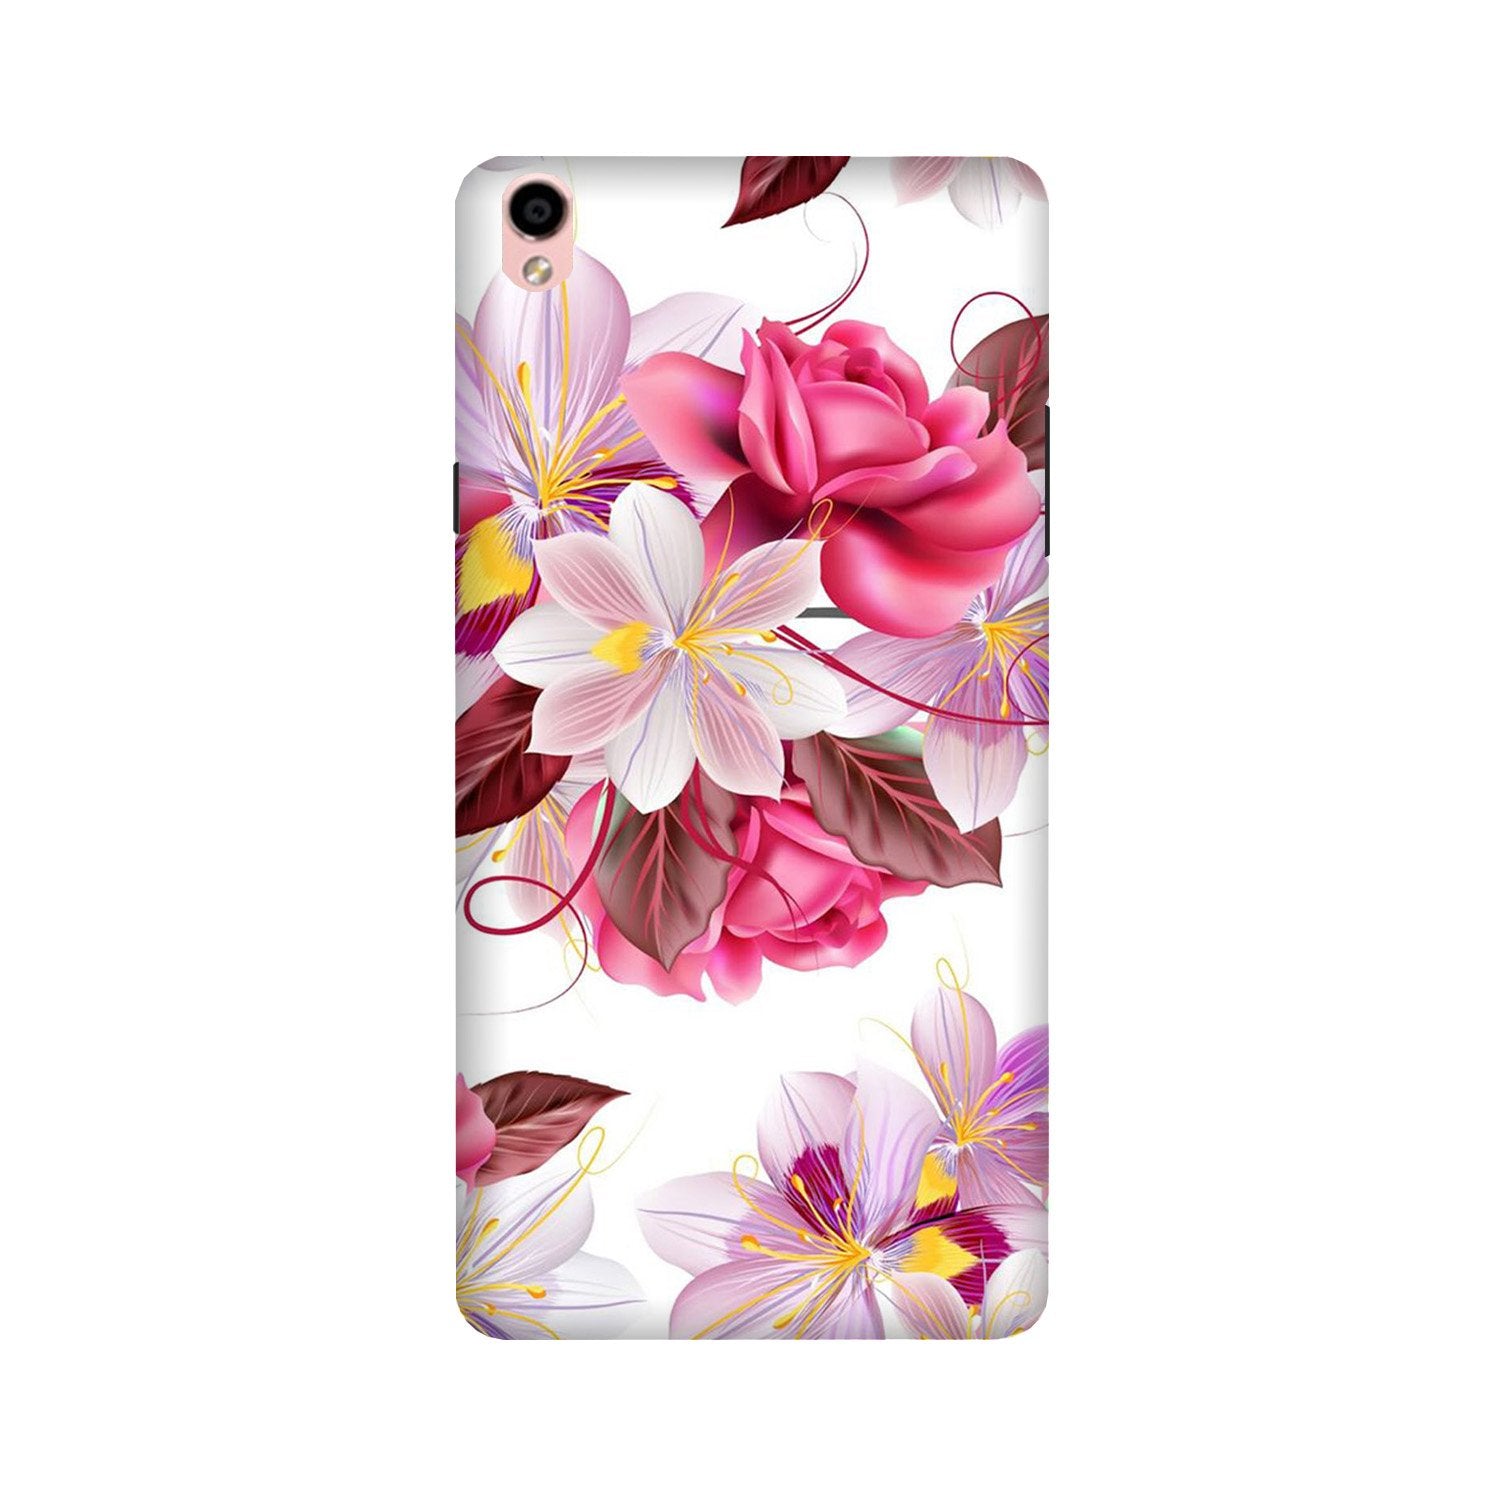 Beautiful flowers Case for Oppo F1 Plus